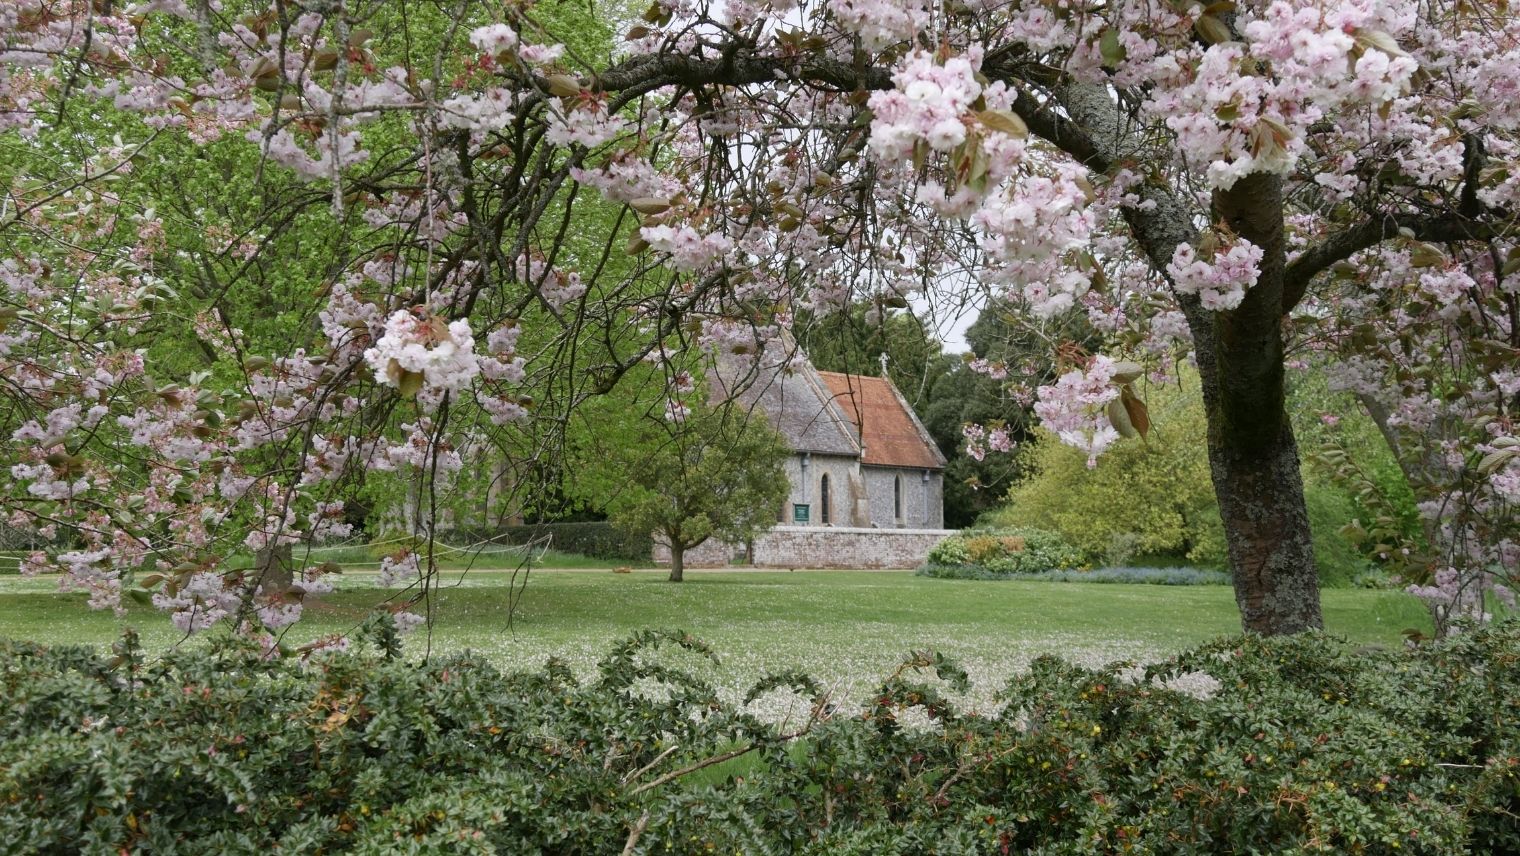 Cherry blossoms at Hinton Ampner